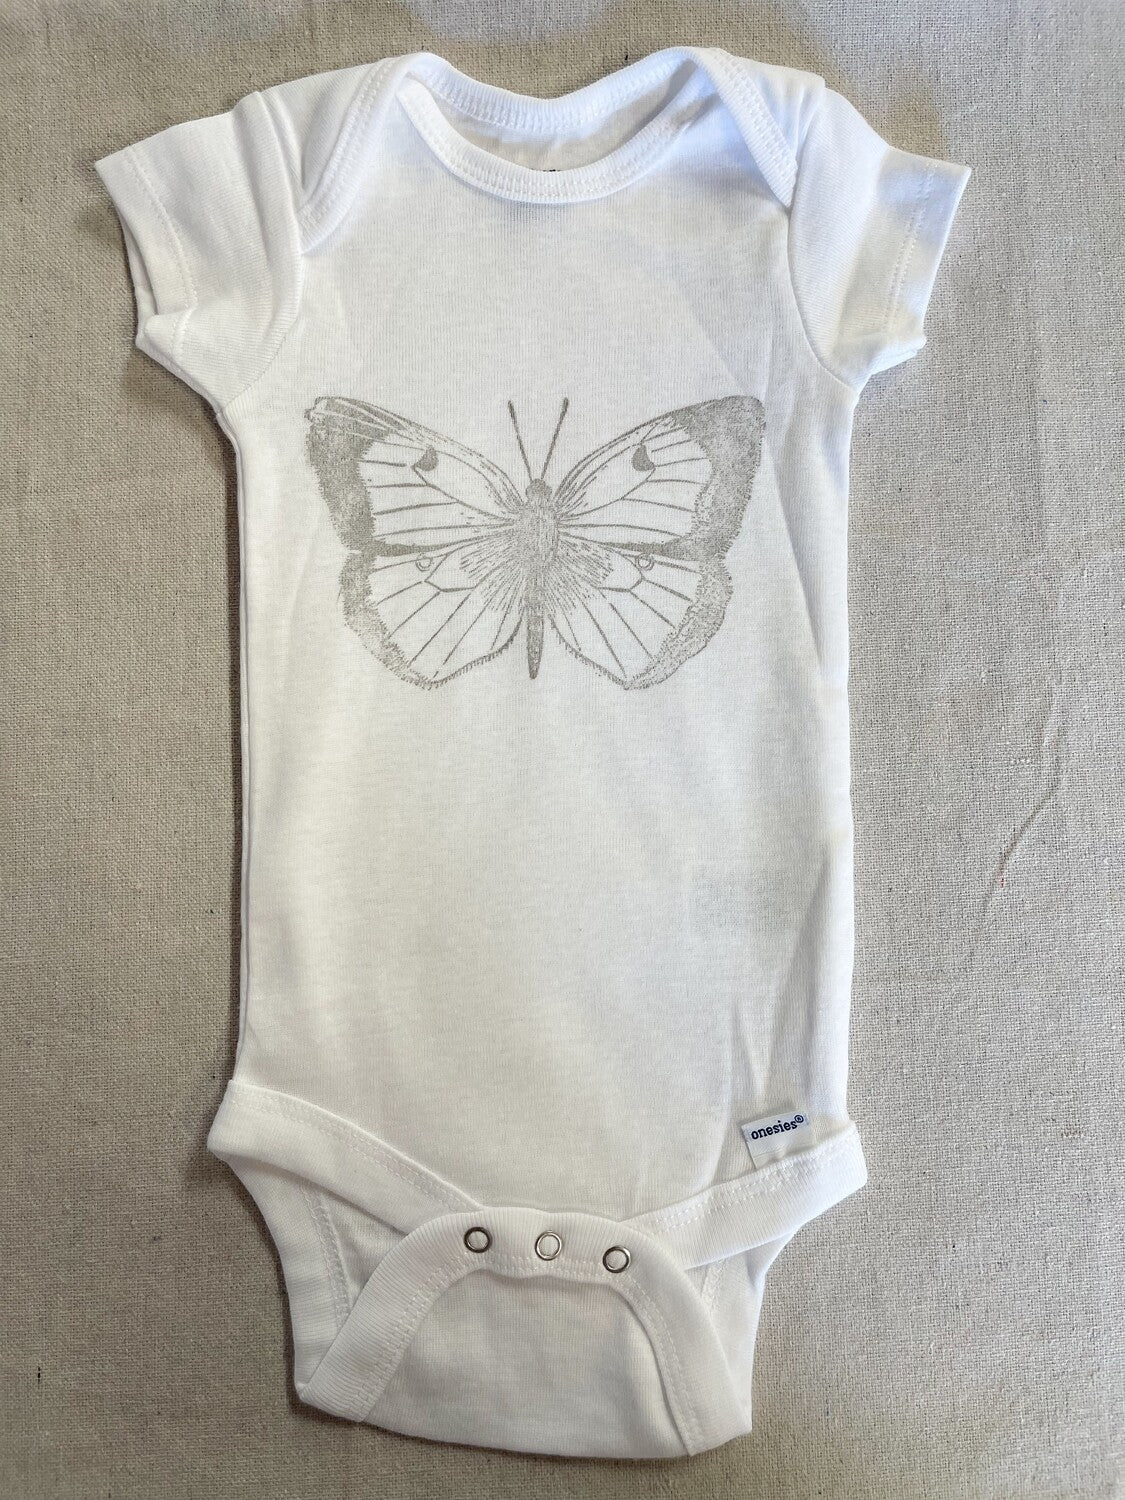 Butterfly Printed Cotton Baby One-Piece 6-9 Months Short Sleeve-Stockton Farm-Baby One-Piece-Stockton Farm